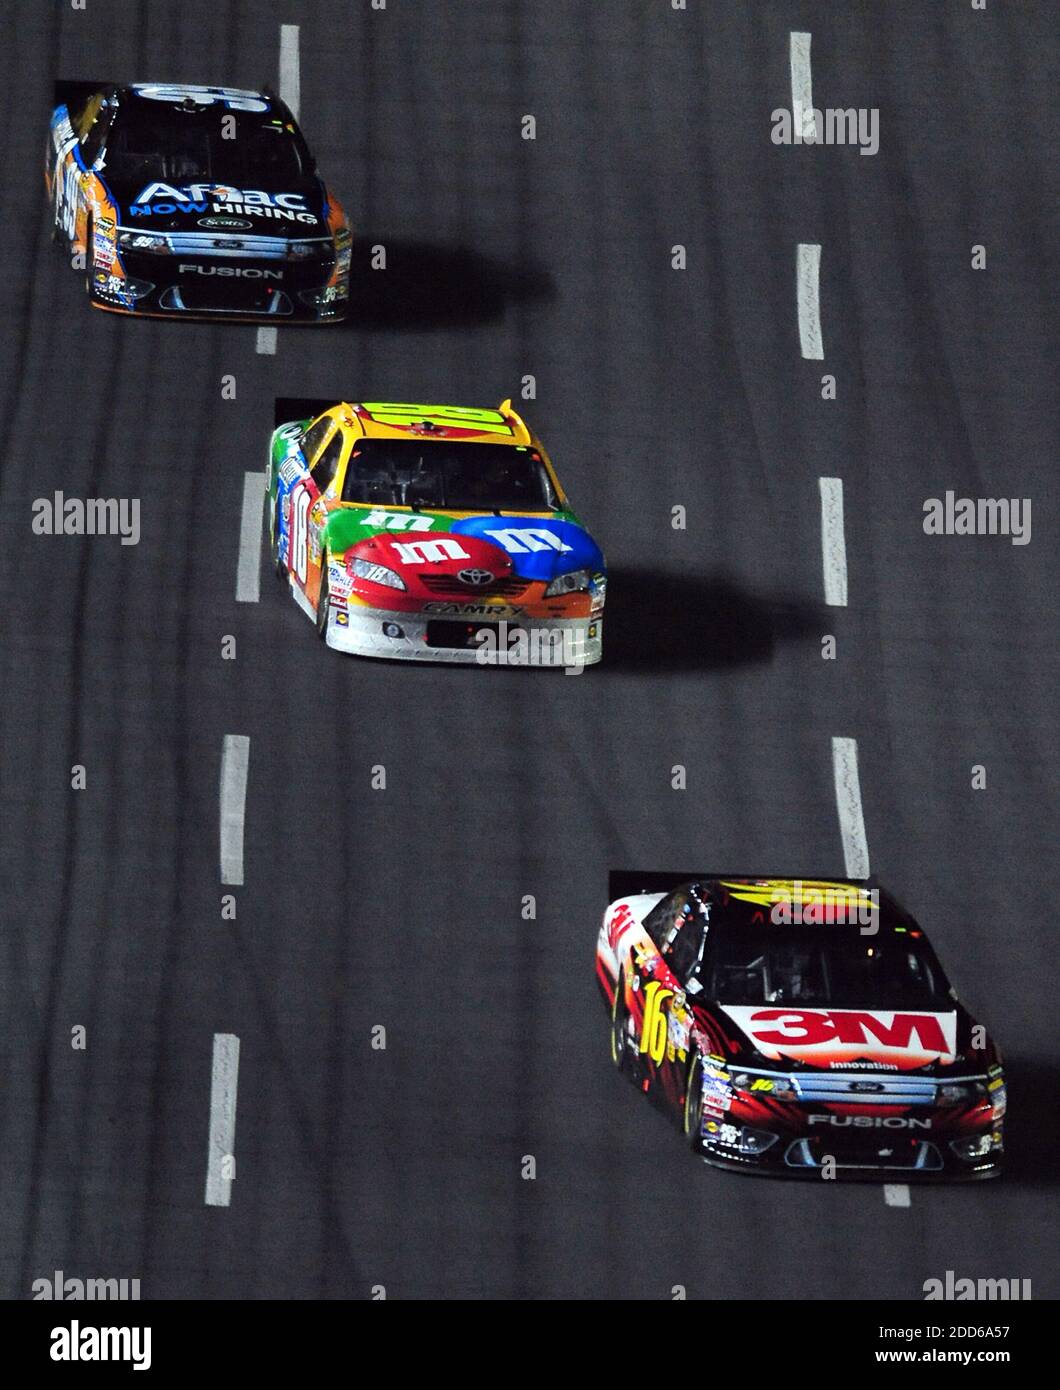 NO FILM, NO VIDEO, NO TV, NO DOCUMENTARY - NASCAR Sprint Cup Series driver Greg Biffle (16) leads Kyle Busch (18) and Carl Edwards (99) to the start/finish line during The Sprint Showdown at Charlotte Motor Speedway in Concord, USA on May 21, 2011. Photo by Jeff Siner/Charlotte Observer/MCT/ABACAPRESS.COM Stock Photo